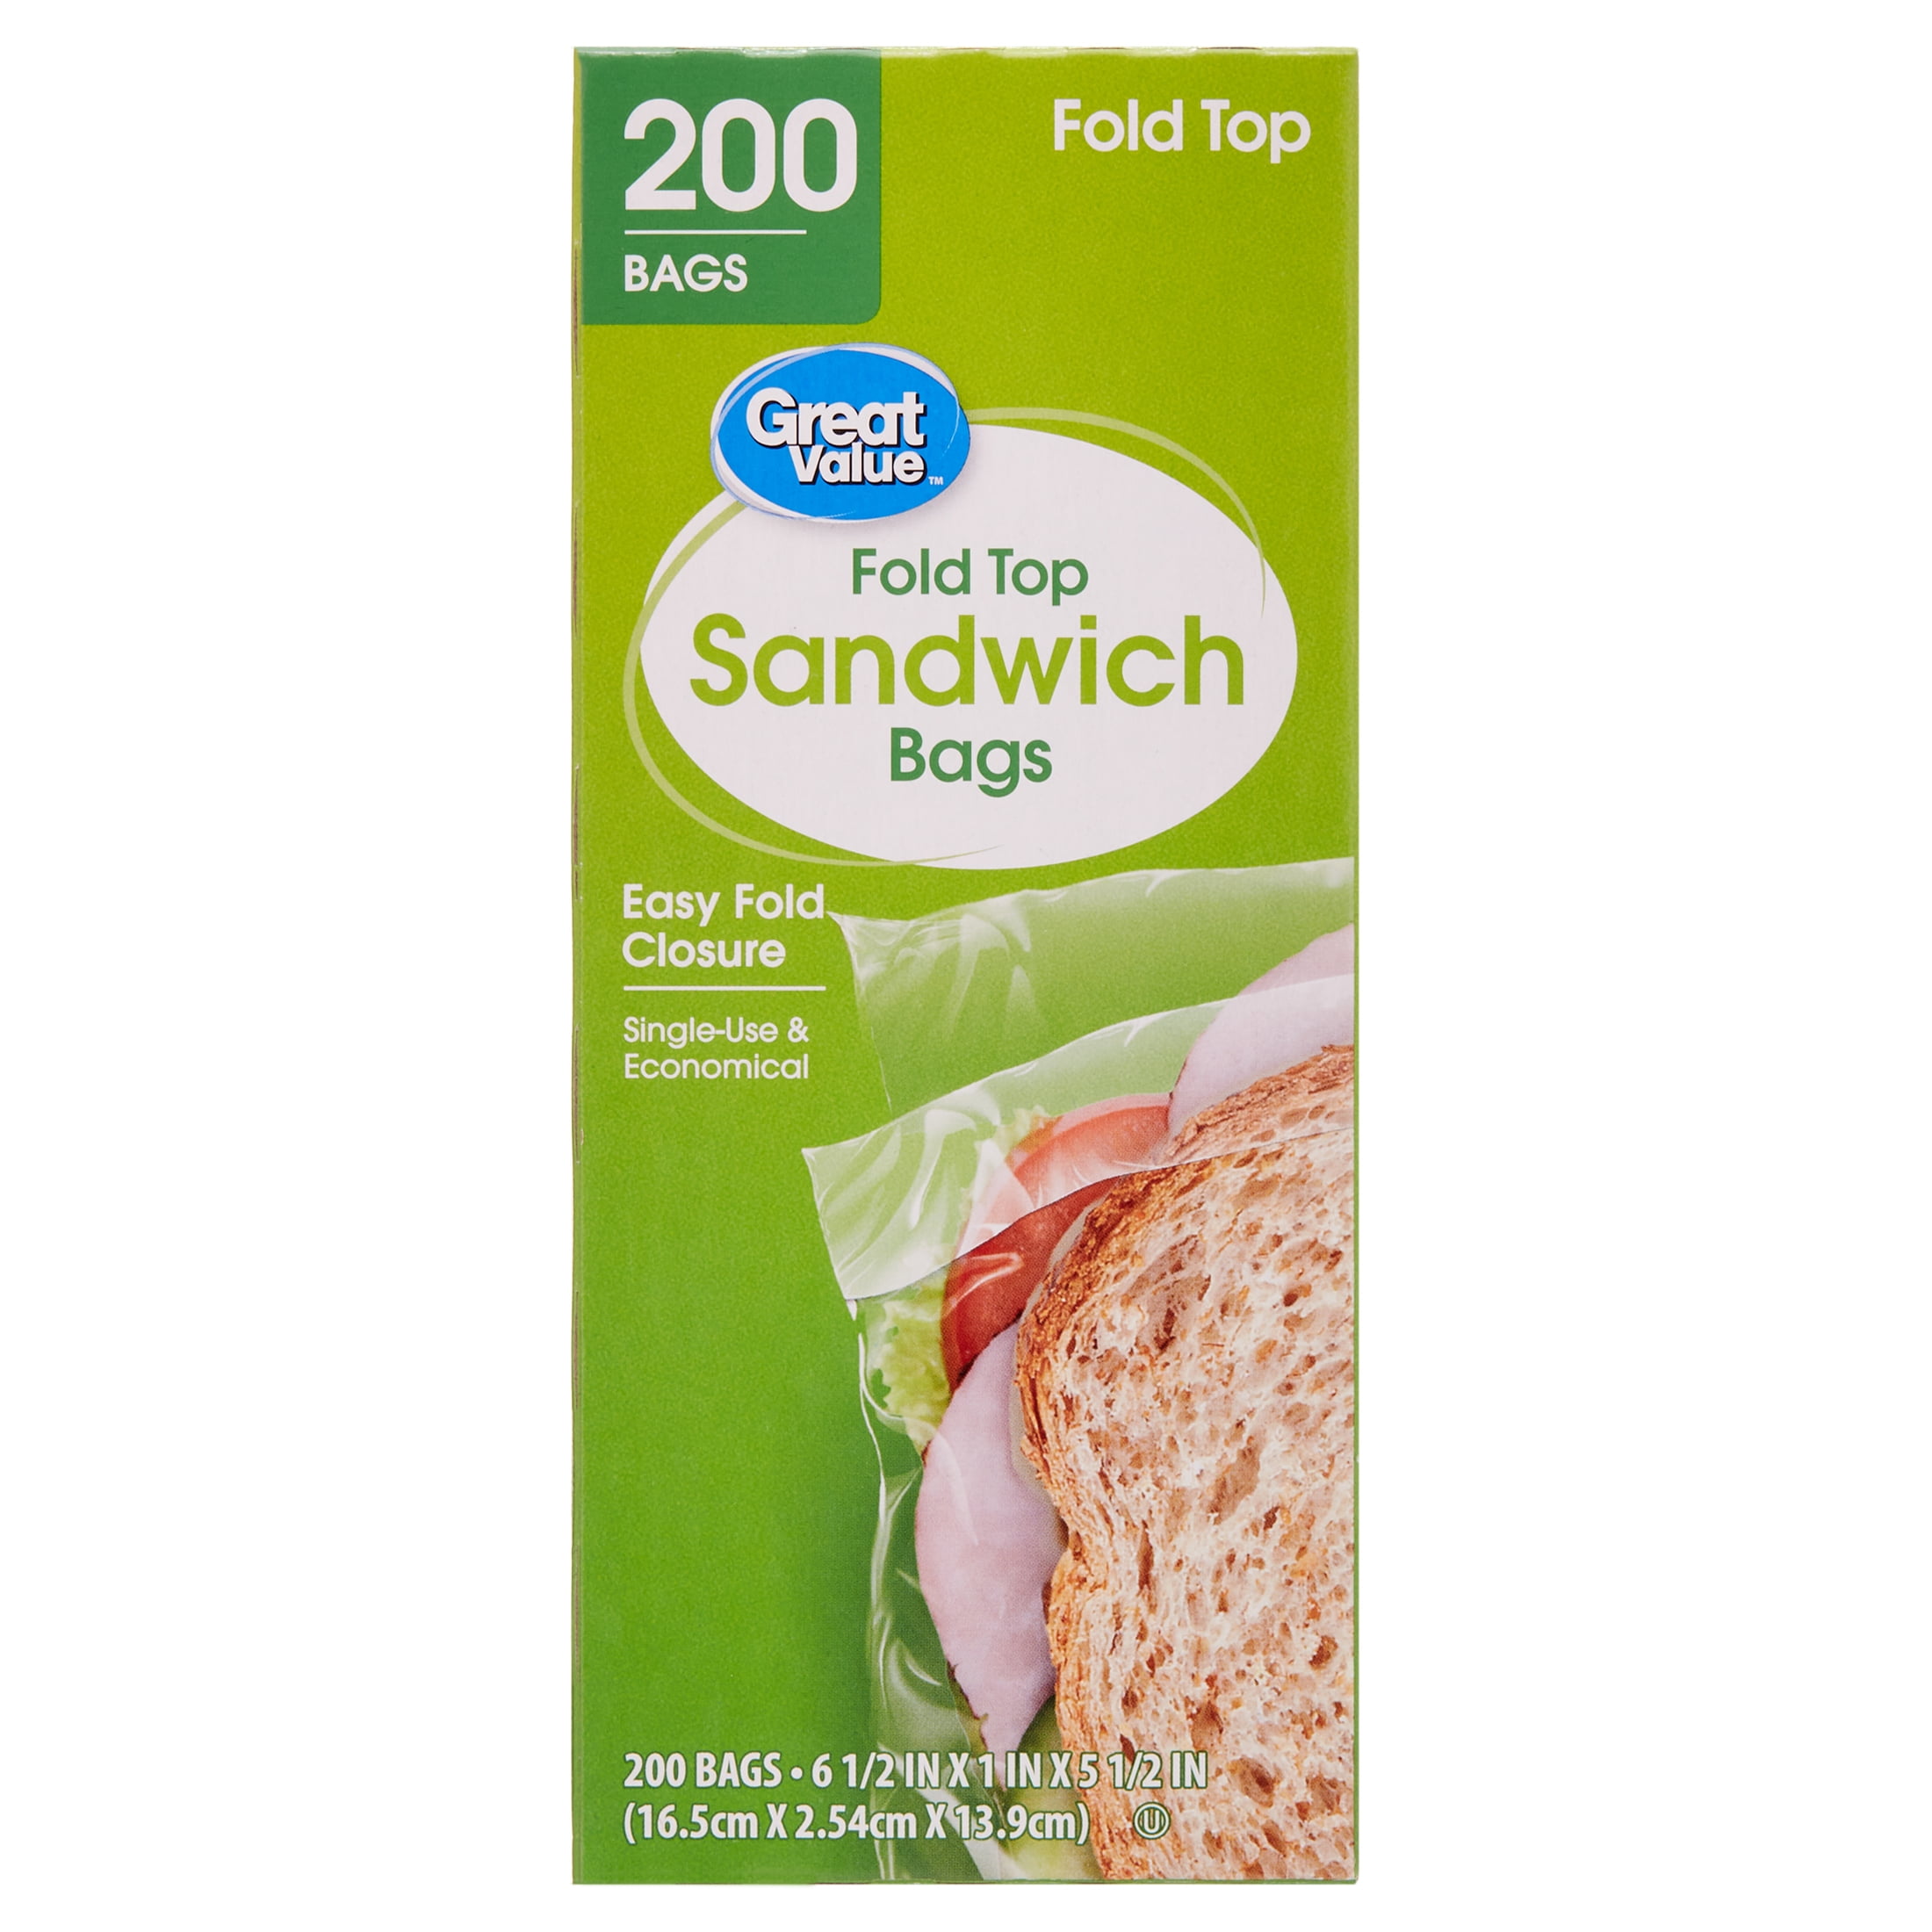 2 packs E-Z Foil Vintage Factory Sealed Sandwich Bags 20 bags per pack Made USA 